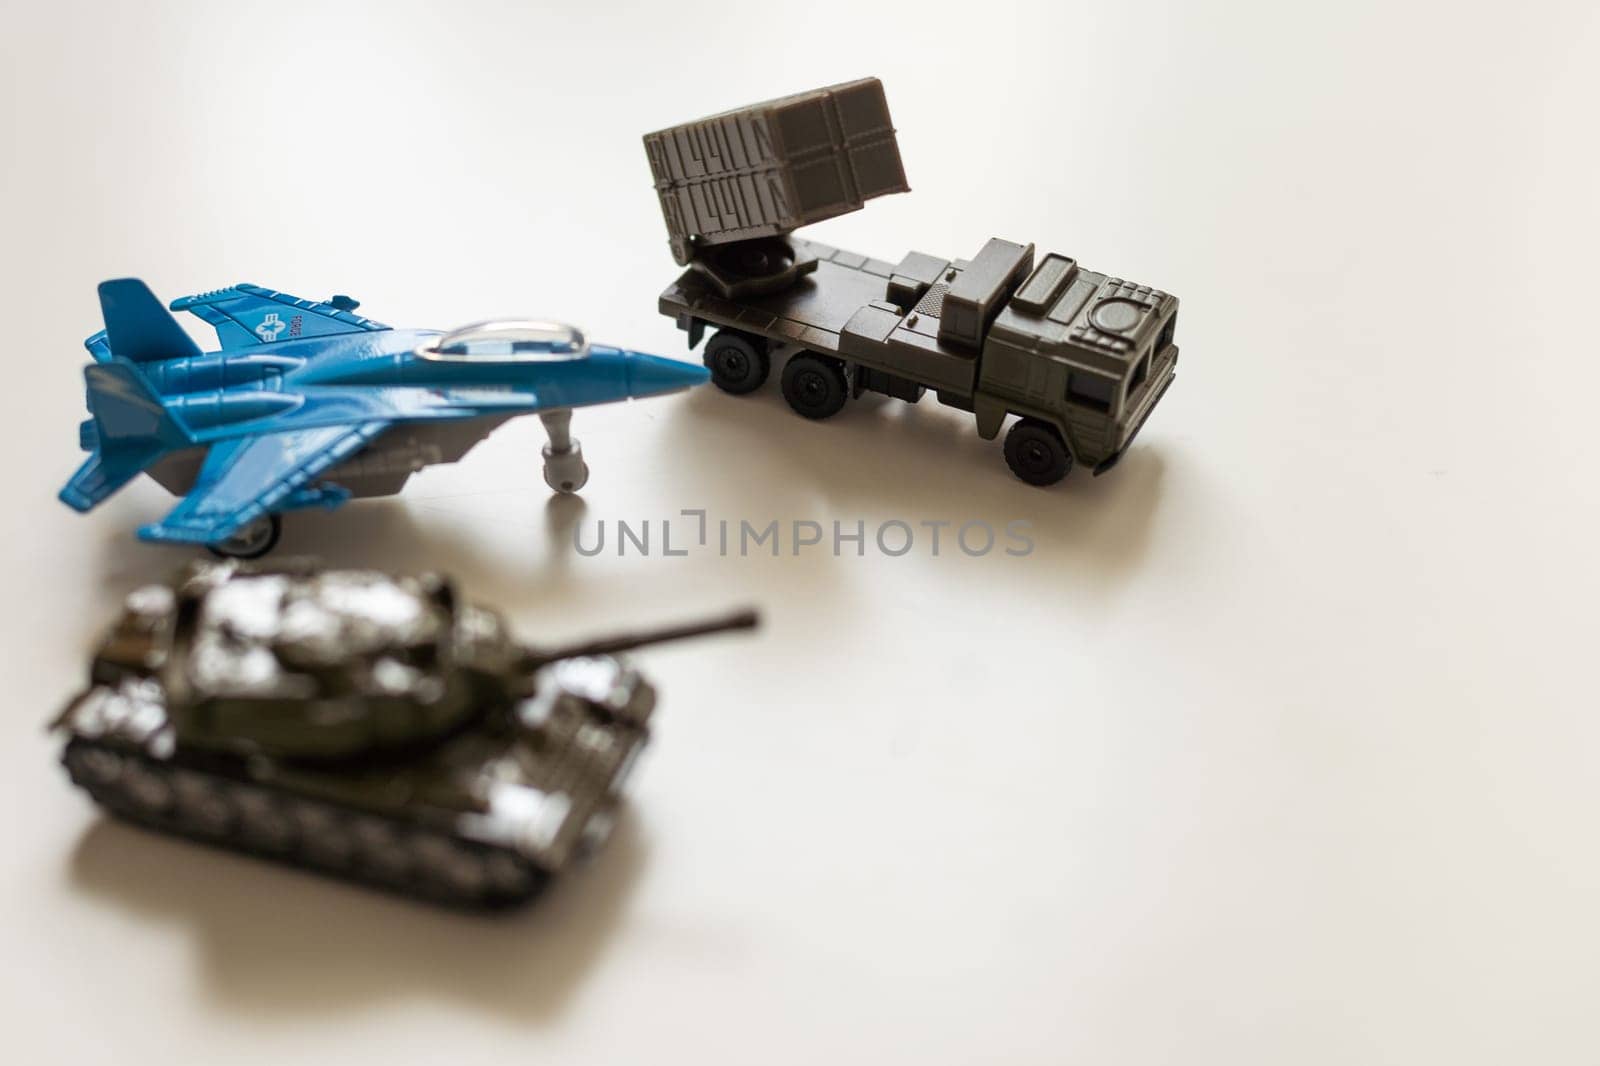 Plastic models of military equipment after assembly and painting. High quality photo